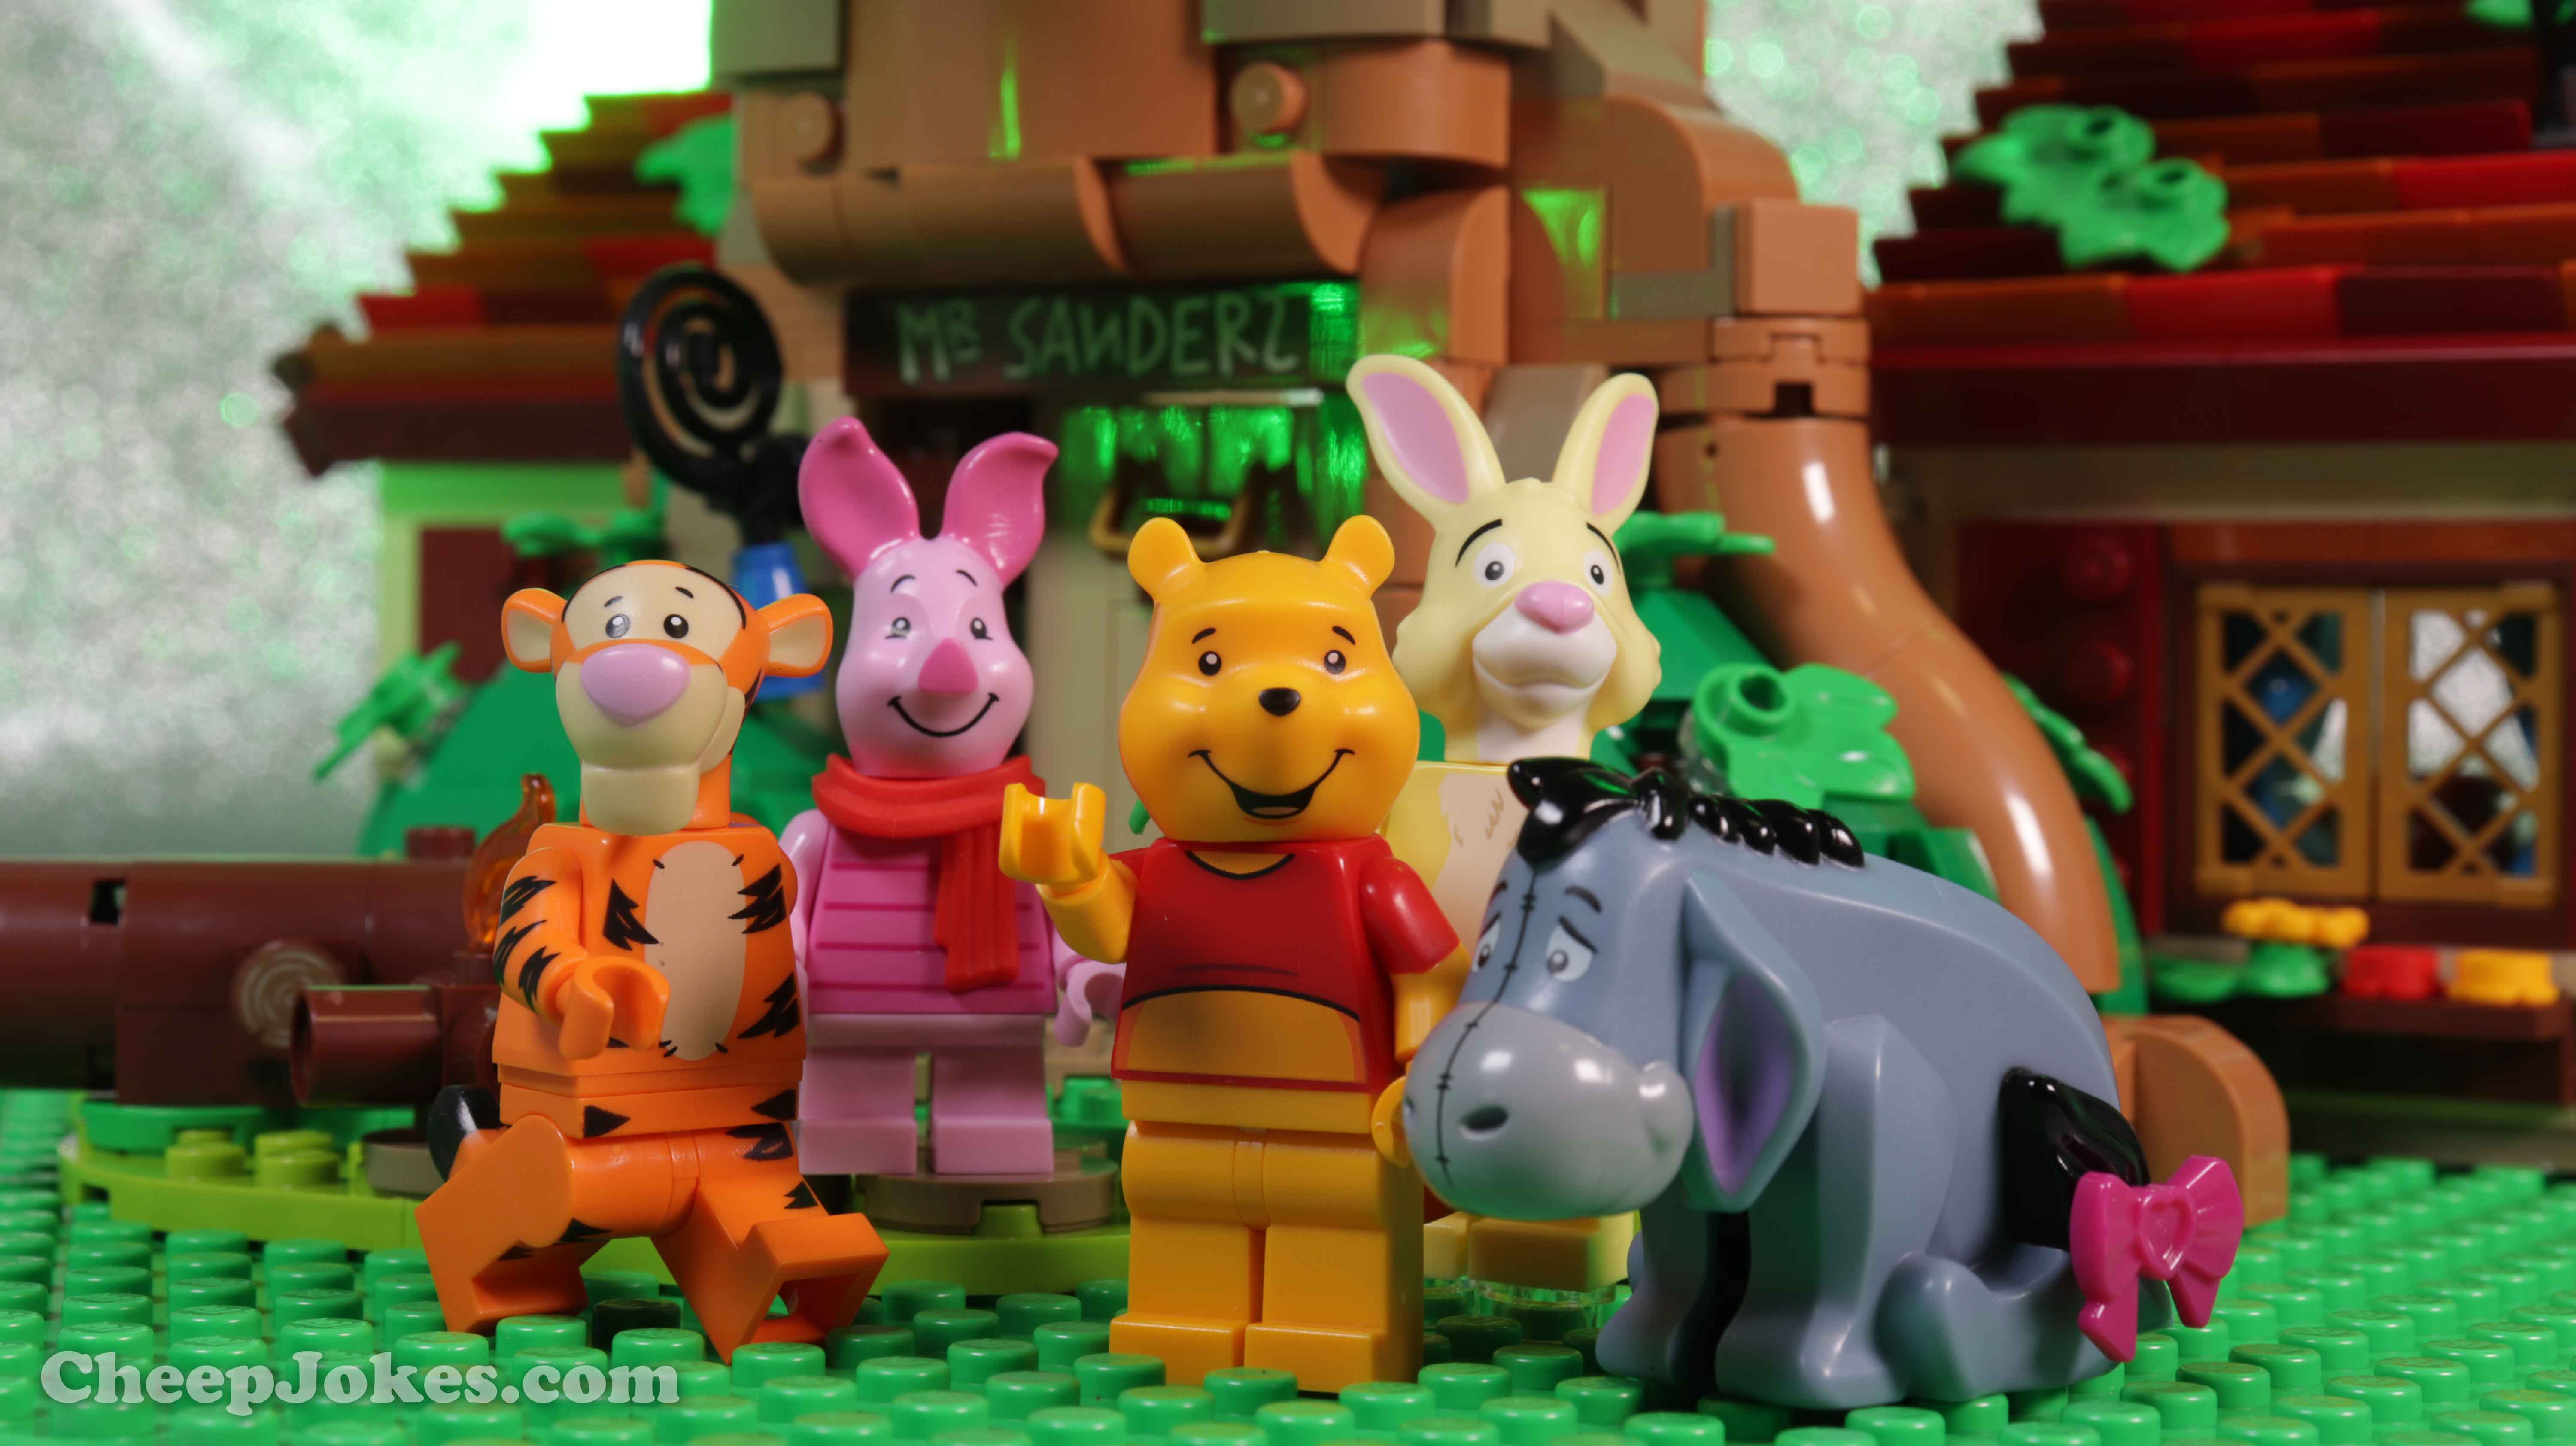 Take time out and rekindle joyful childhood memories with this LEGO® Ideas set (21326) featuring Disney’s Winnie the Pooh and a delightful LEGO brick recreation of Pooh Bear’s house under a big oak tree in Hundred Acre Wood. Great to build alone or with family, the house opens at the back for easy access to the authentic details inside, including Pooh’s buildable armchair, Pooh-Coo clock, Poohsticks, honey pot elements and much more. You can also create the effect of bees flying around beehives in the branches of the tree, like in the stories. Popular characters The model comes with Disney’s Winnie the Pooh, Piglet, Tigger and Rabbit minifigures, plus an Eeyore LEGO figure. The friends each have an accessory, including Winnie the Pooh’s buildable red balloon, to recreate classic scenes. Special gift Part of a collection of premium-quality LEGO building kits for adults, this set makes a charming gift for yourself, a Disney Winnie the Pooh enthusiast, LEGO fan or any hobbyist.